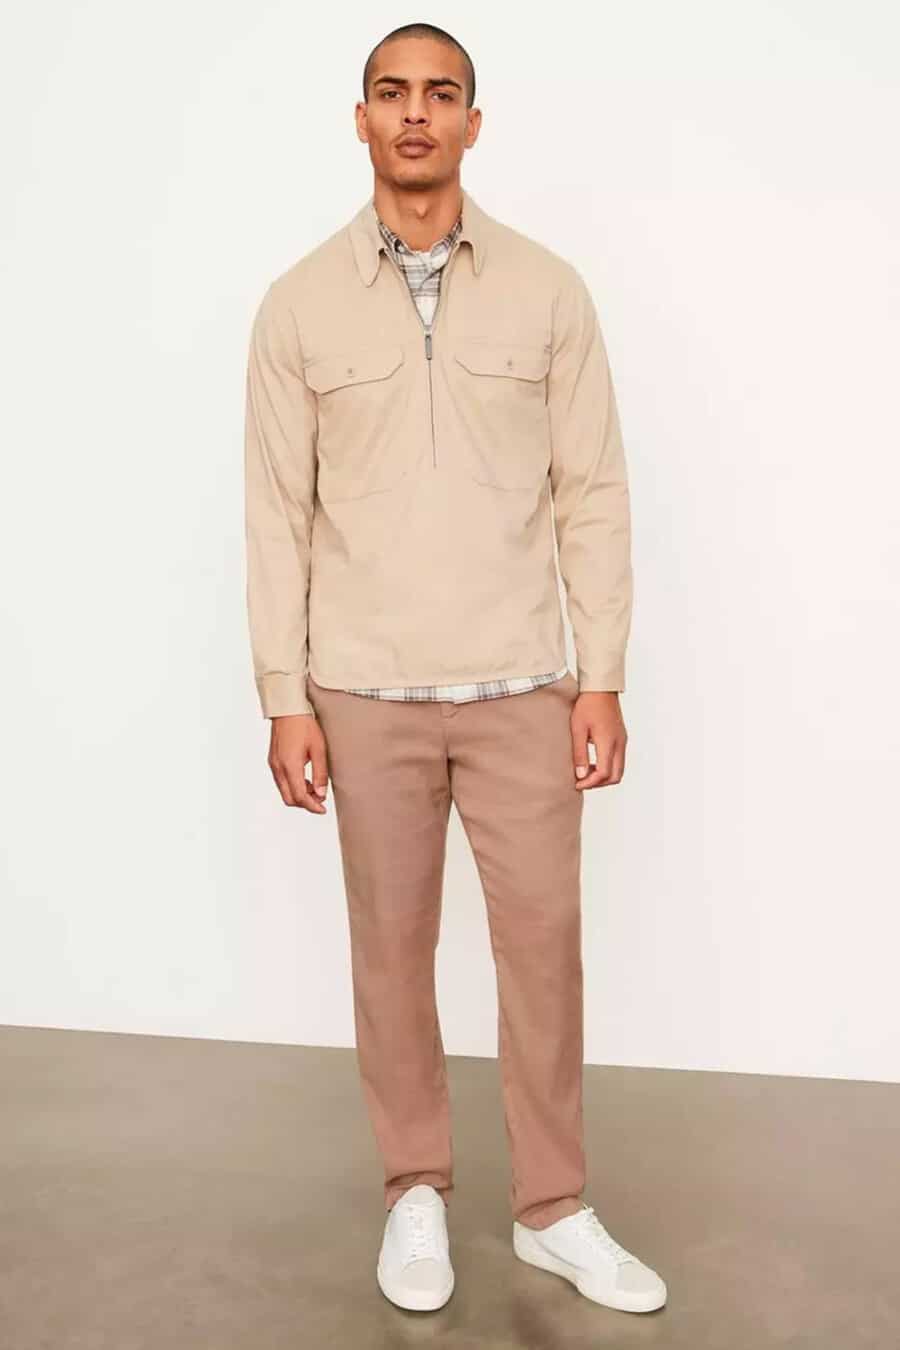 Men's brown chinos, white check shirt, cream popover shirt and white sneakers outfit